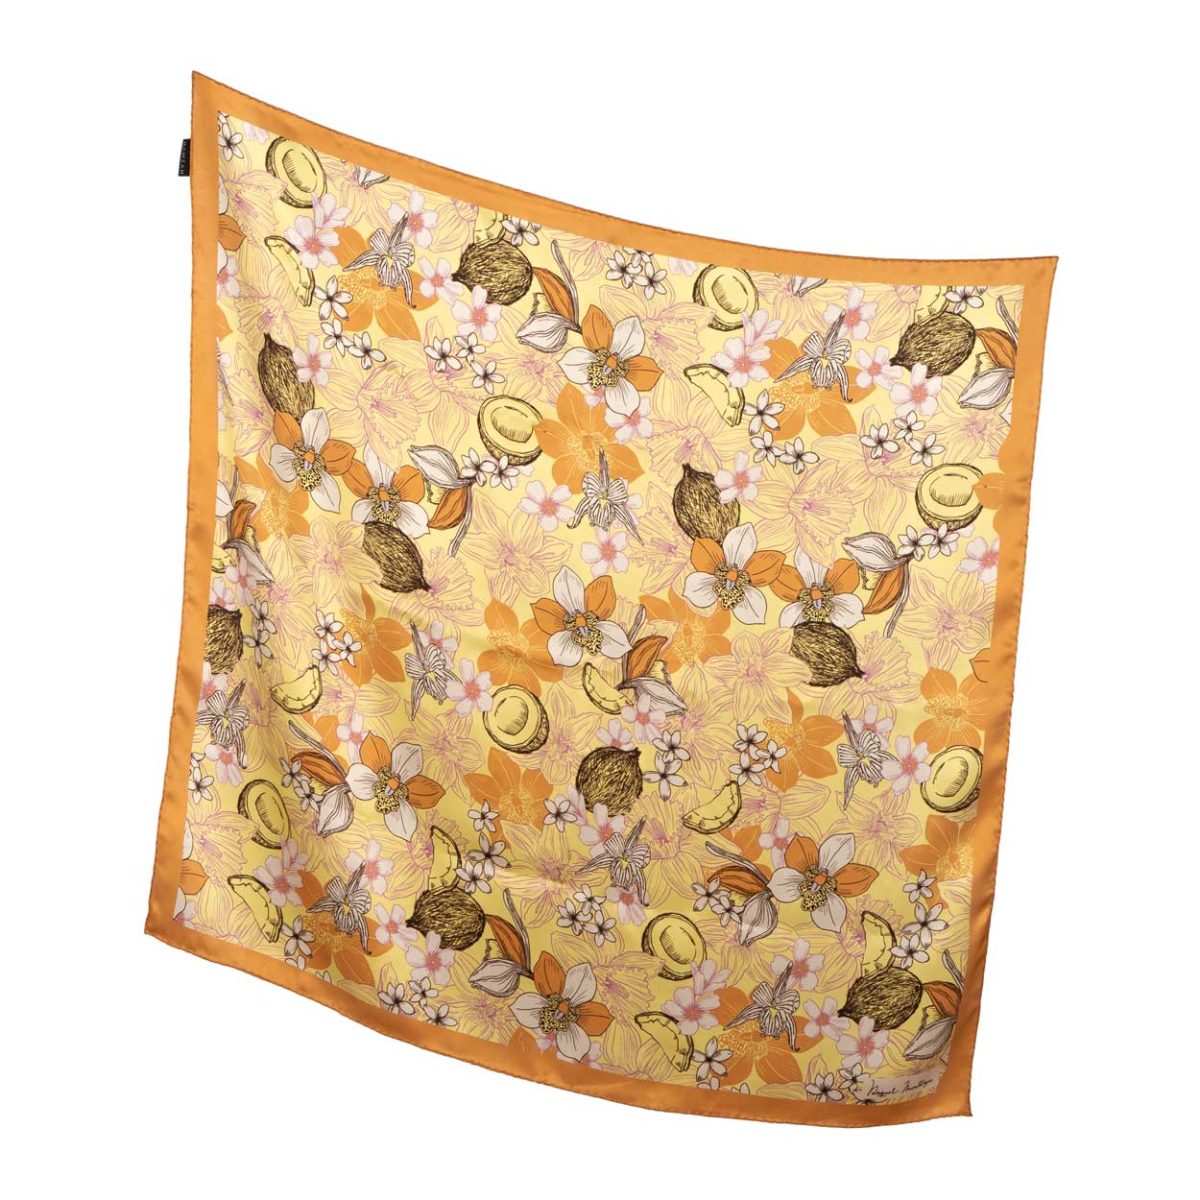 Large square silk scarf with floral print in mustard shades